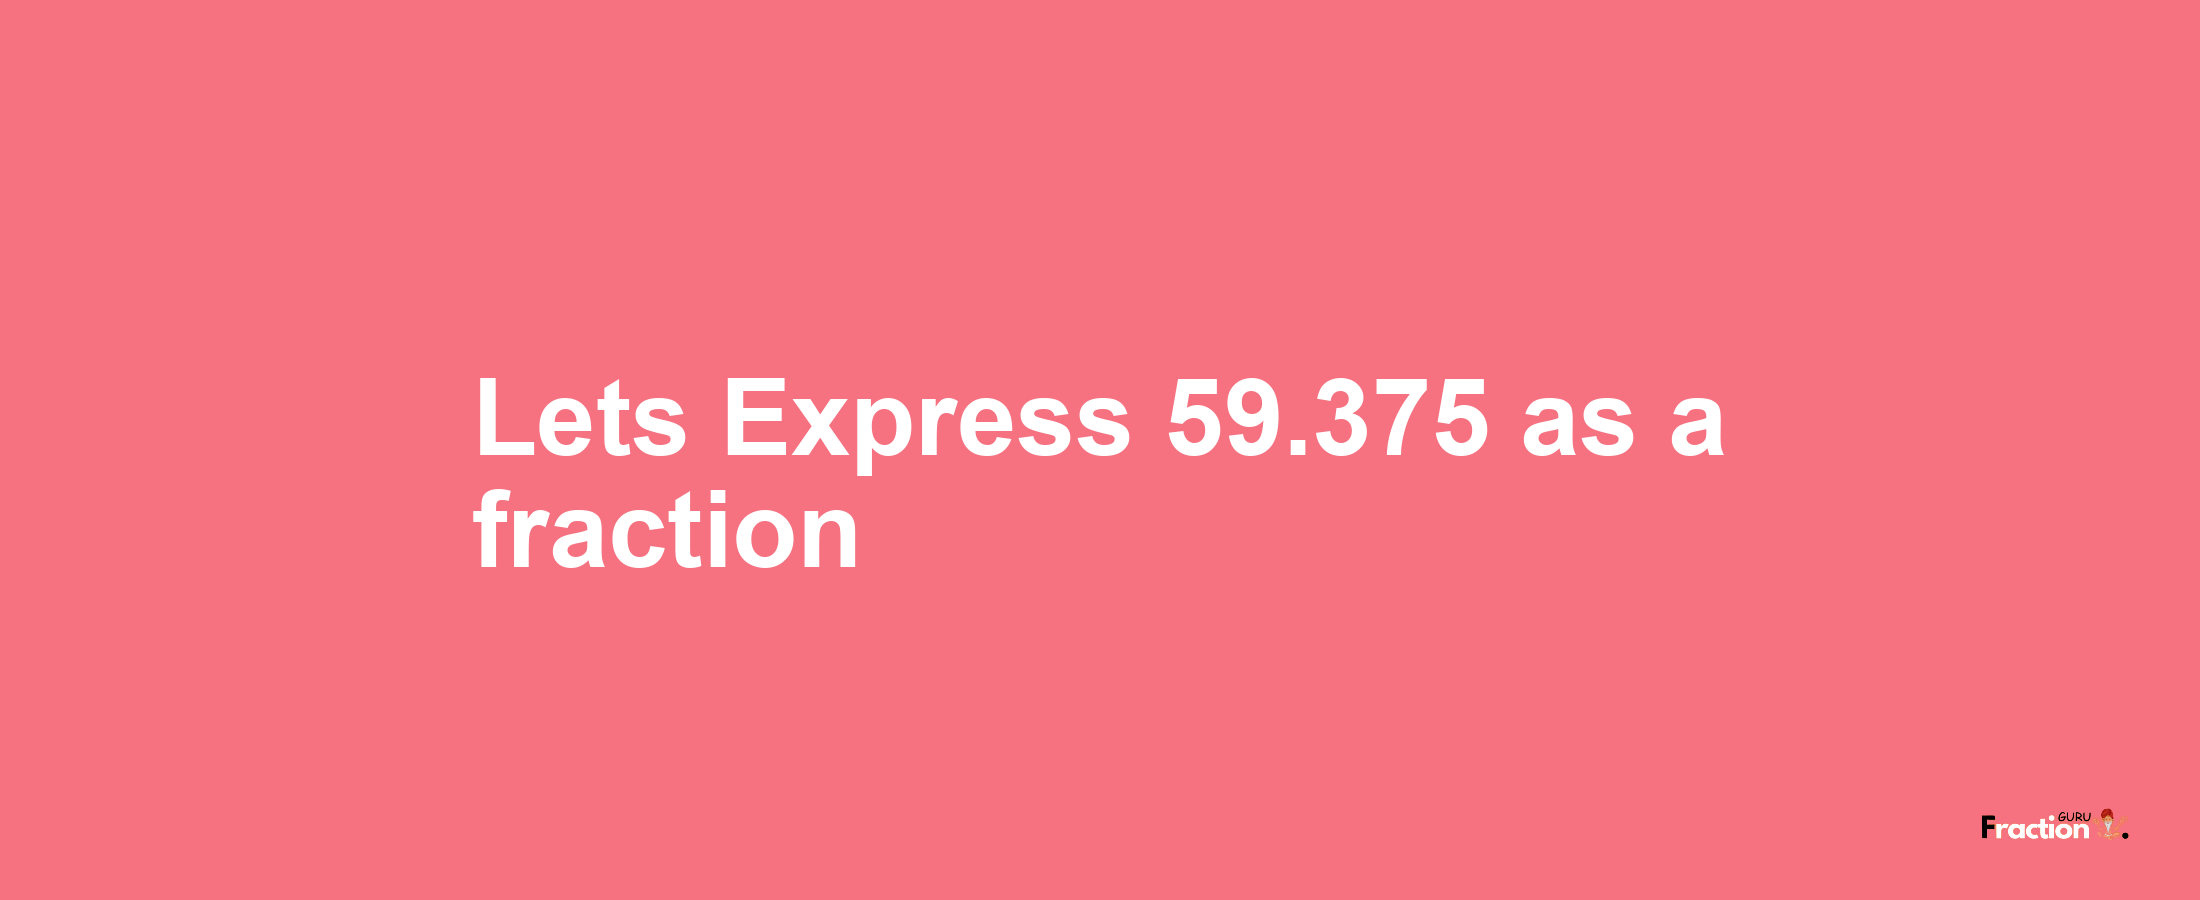 Lets Express 59.375 as afraction